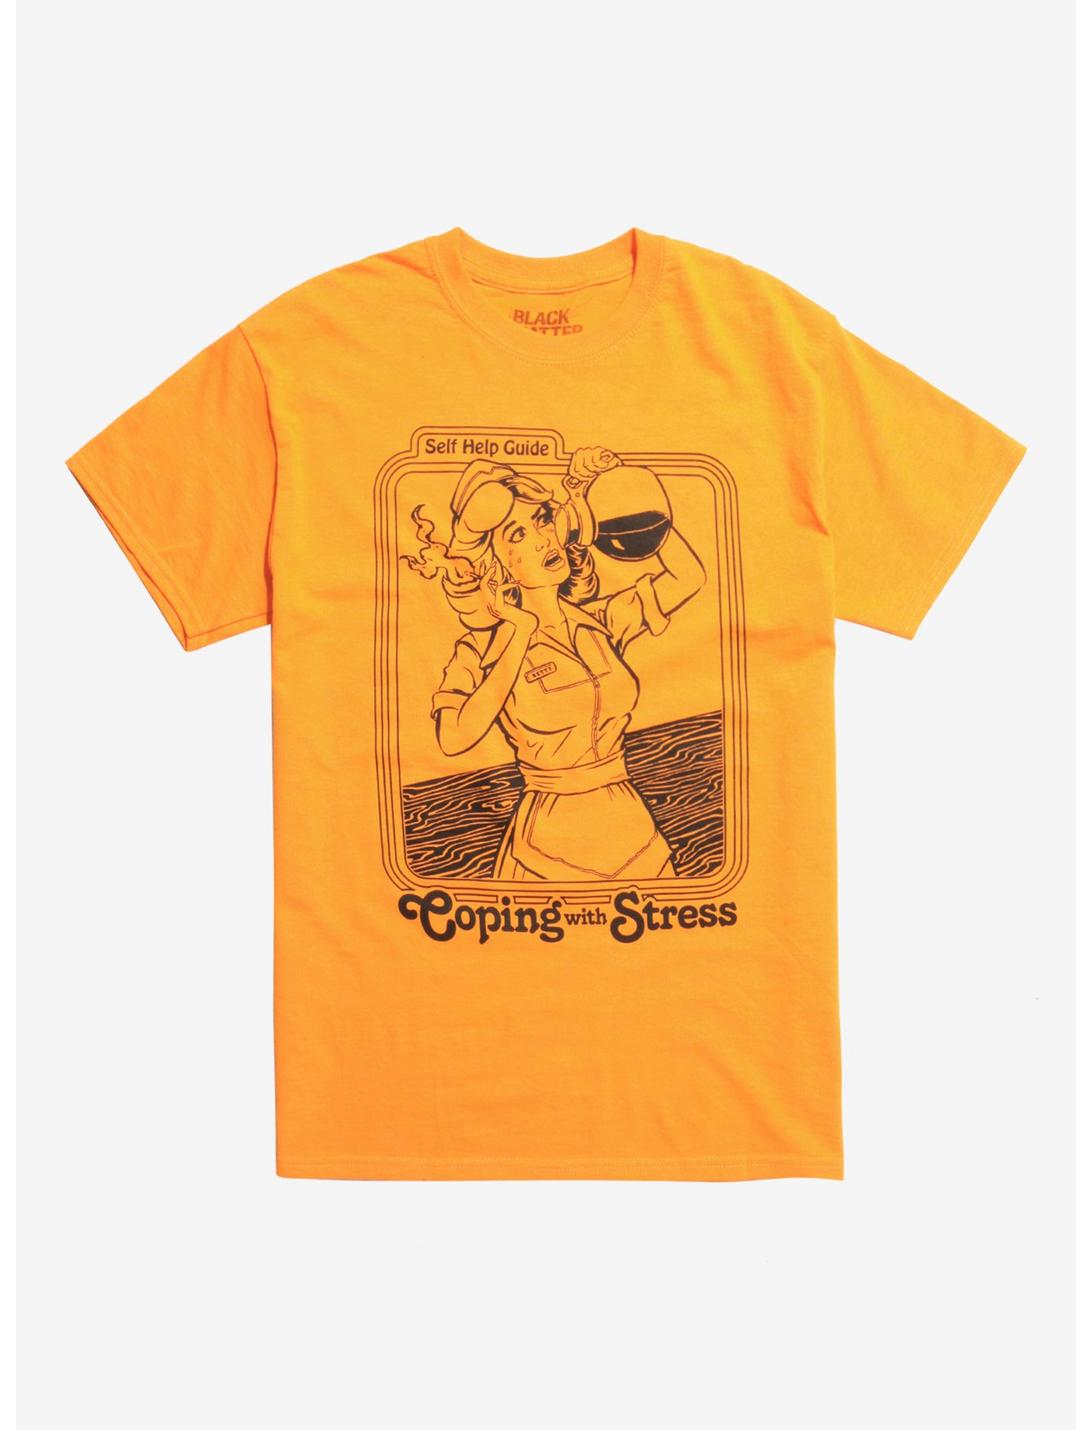 Coping With Stress Neon Orange T-Shirt By Steven Rhodes Hot Topic Exclusive, SAFETY ORANGE, hi-res